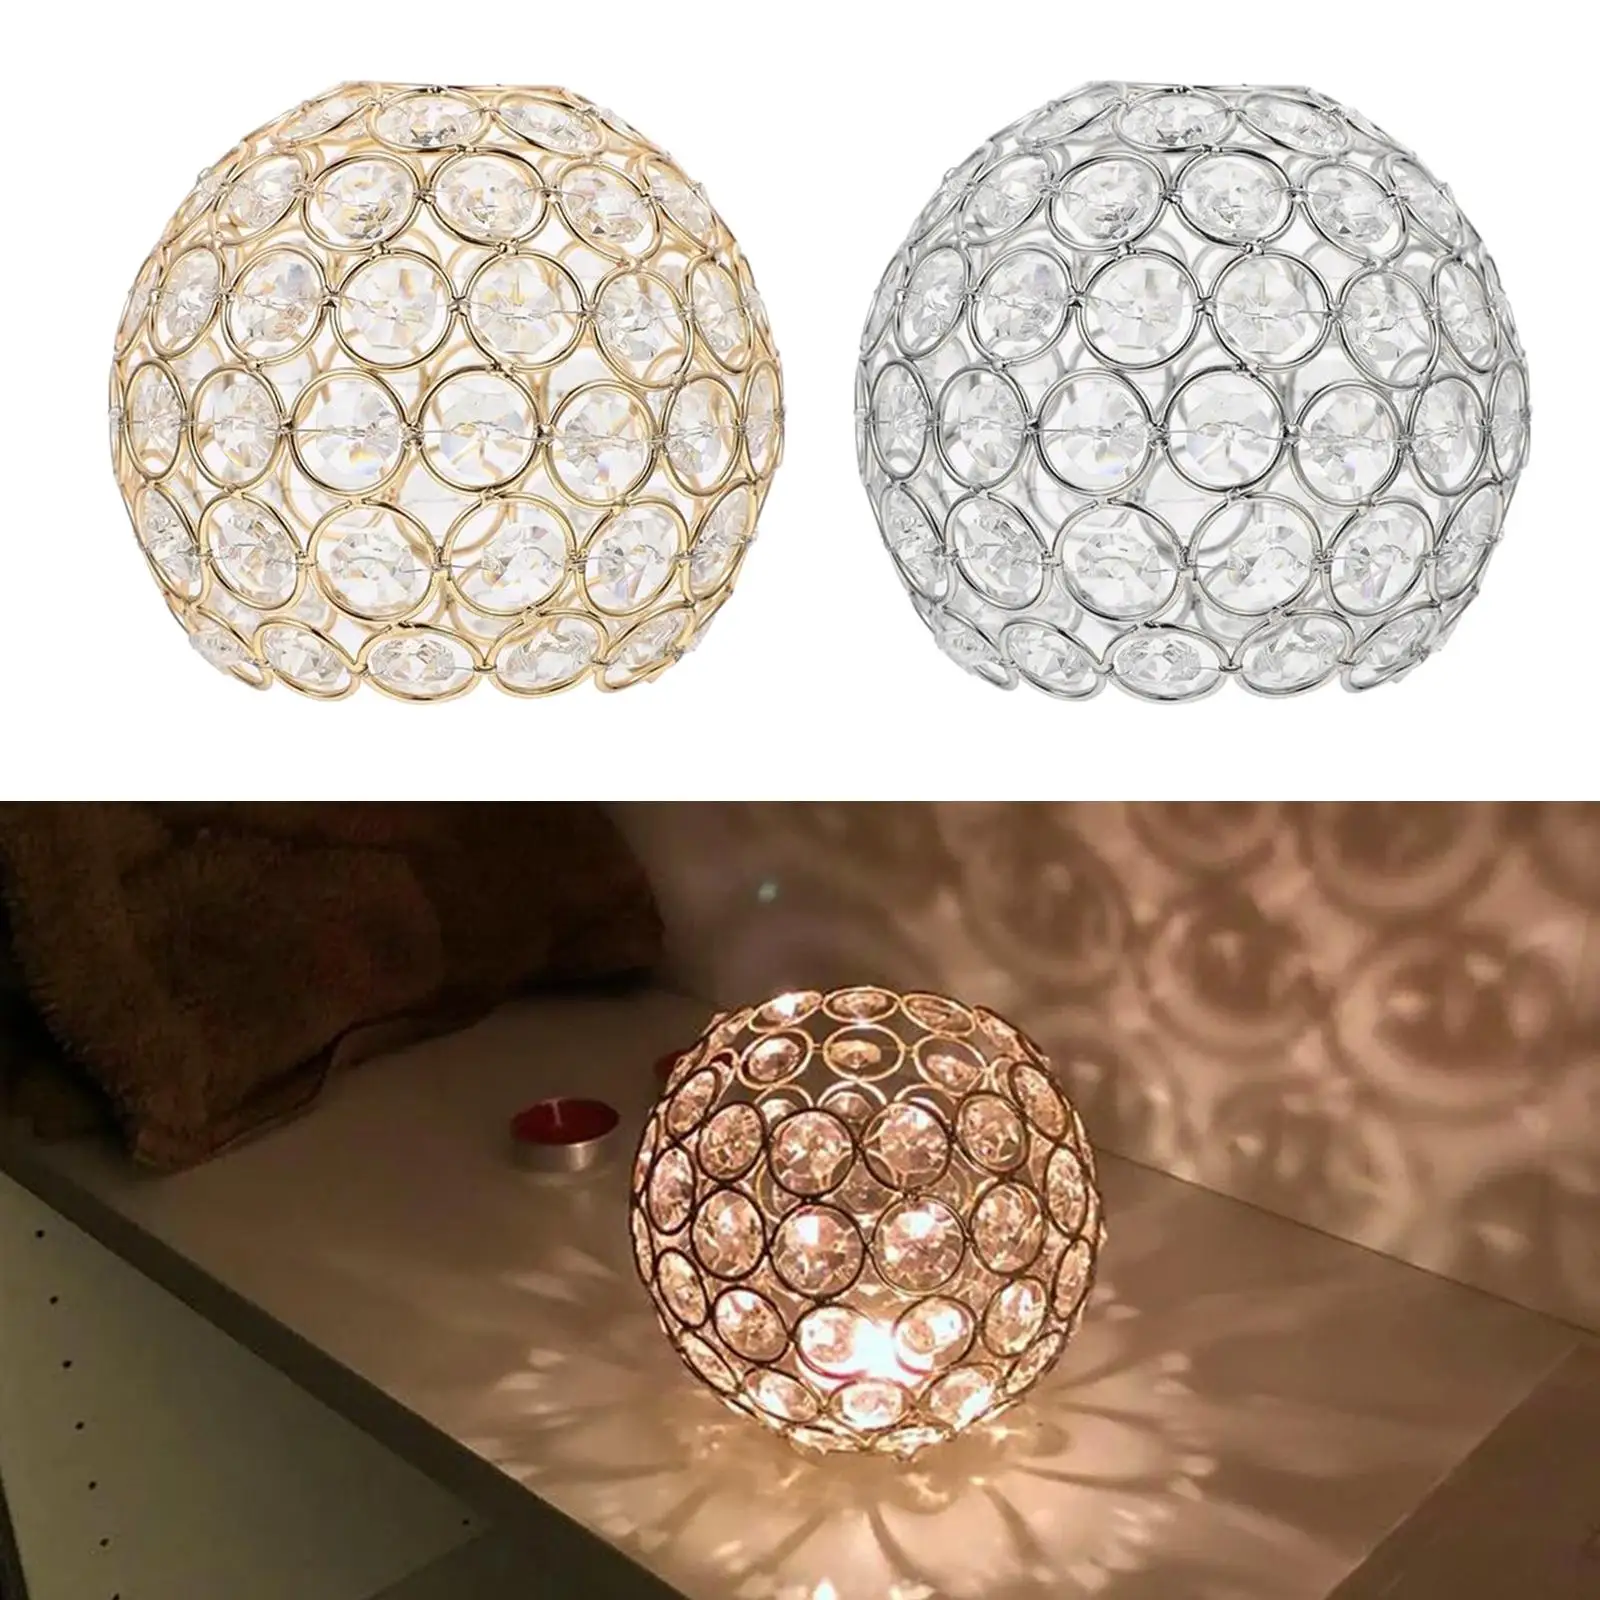 Shiny Ceiling Light Shade Replacement Cover Chandelier Crystal Lampshade for